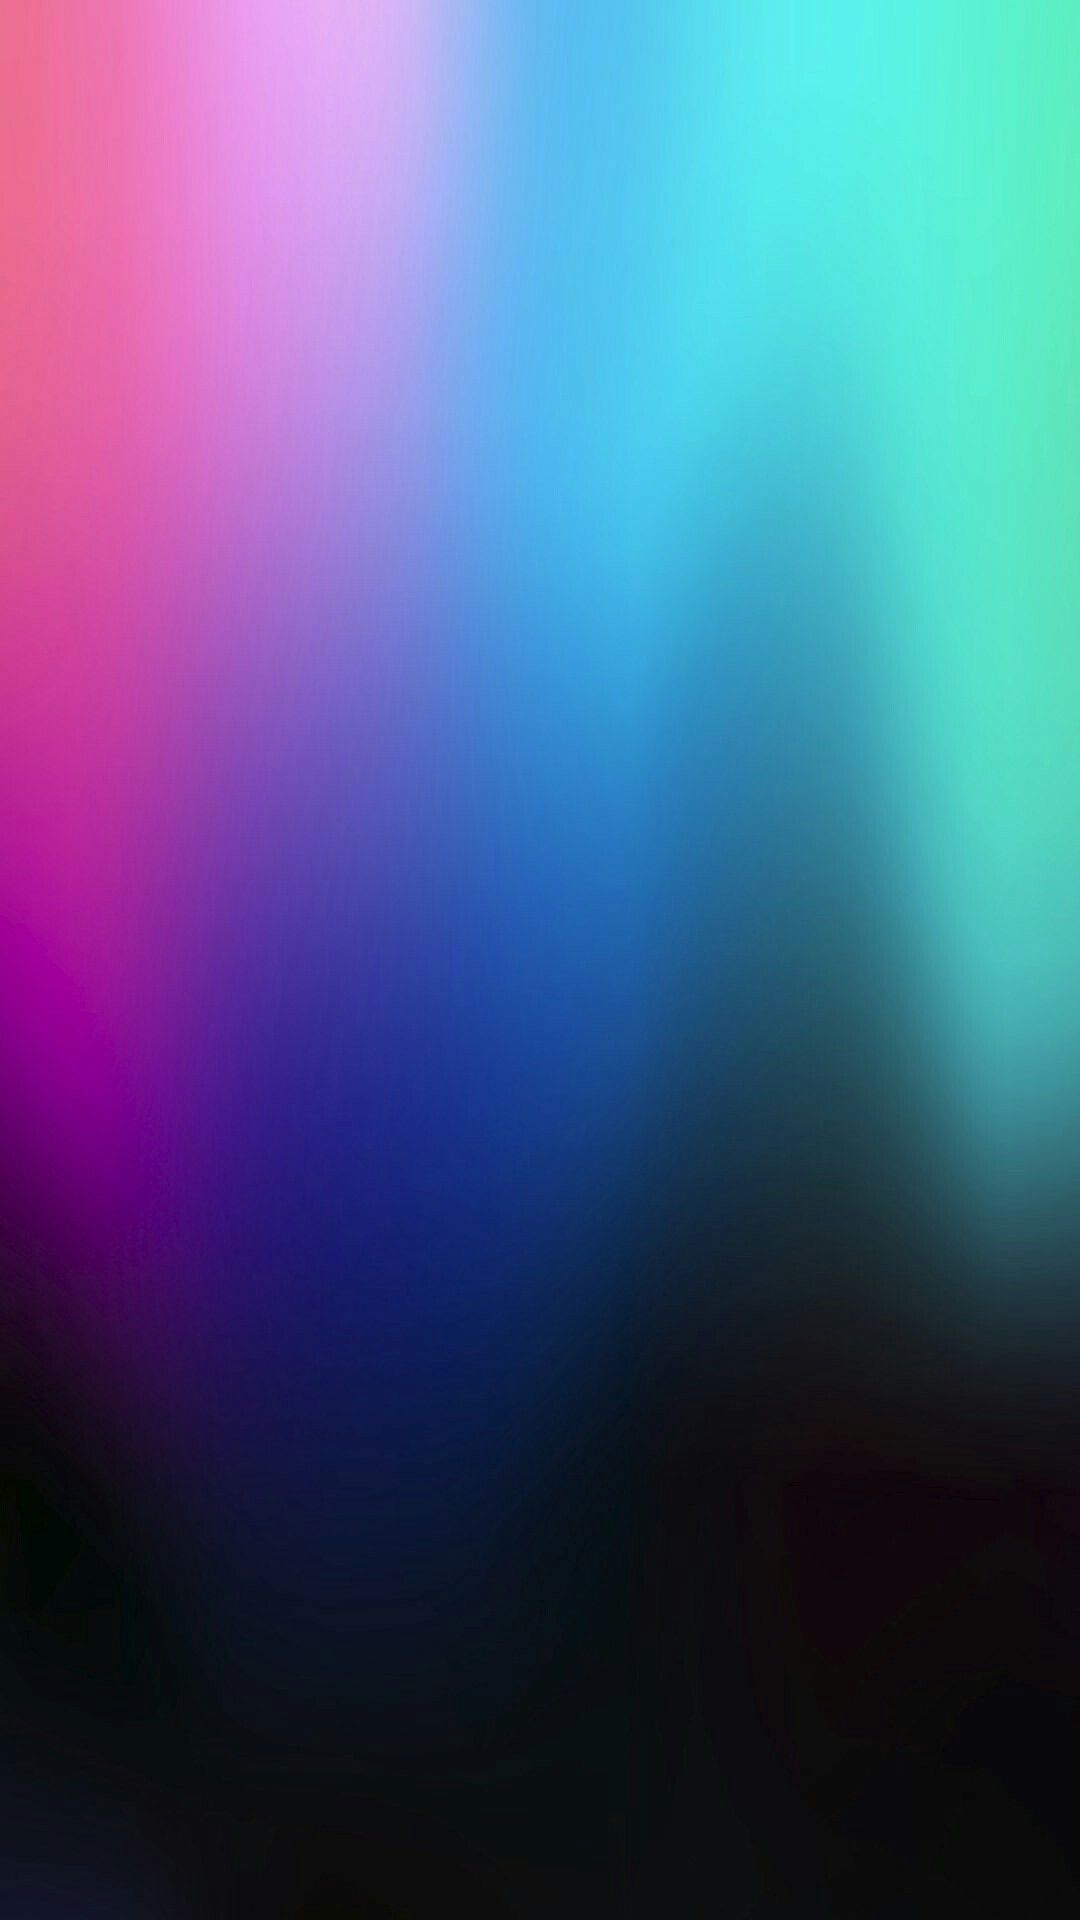 1080x1920 Let's have an absolutely amazing experience with our existence!&eth;&#159;&yen;&deg; | Android wallpaper dark, Iphone wallpaper blur, Free iphone wallpaper